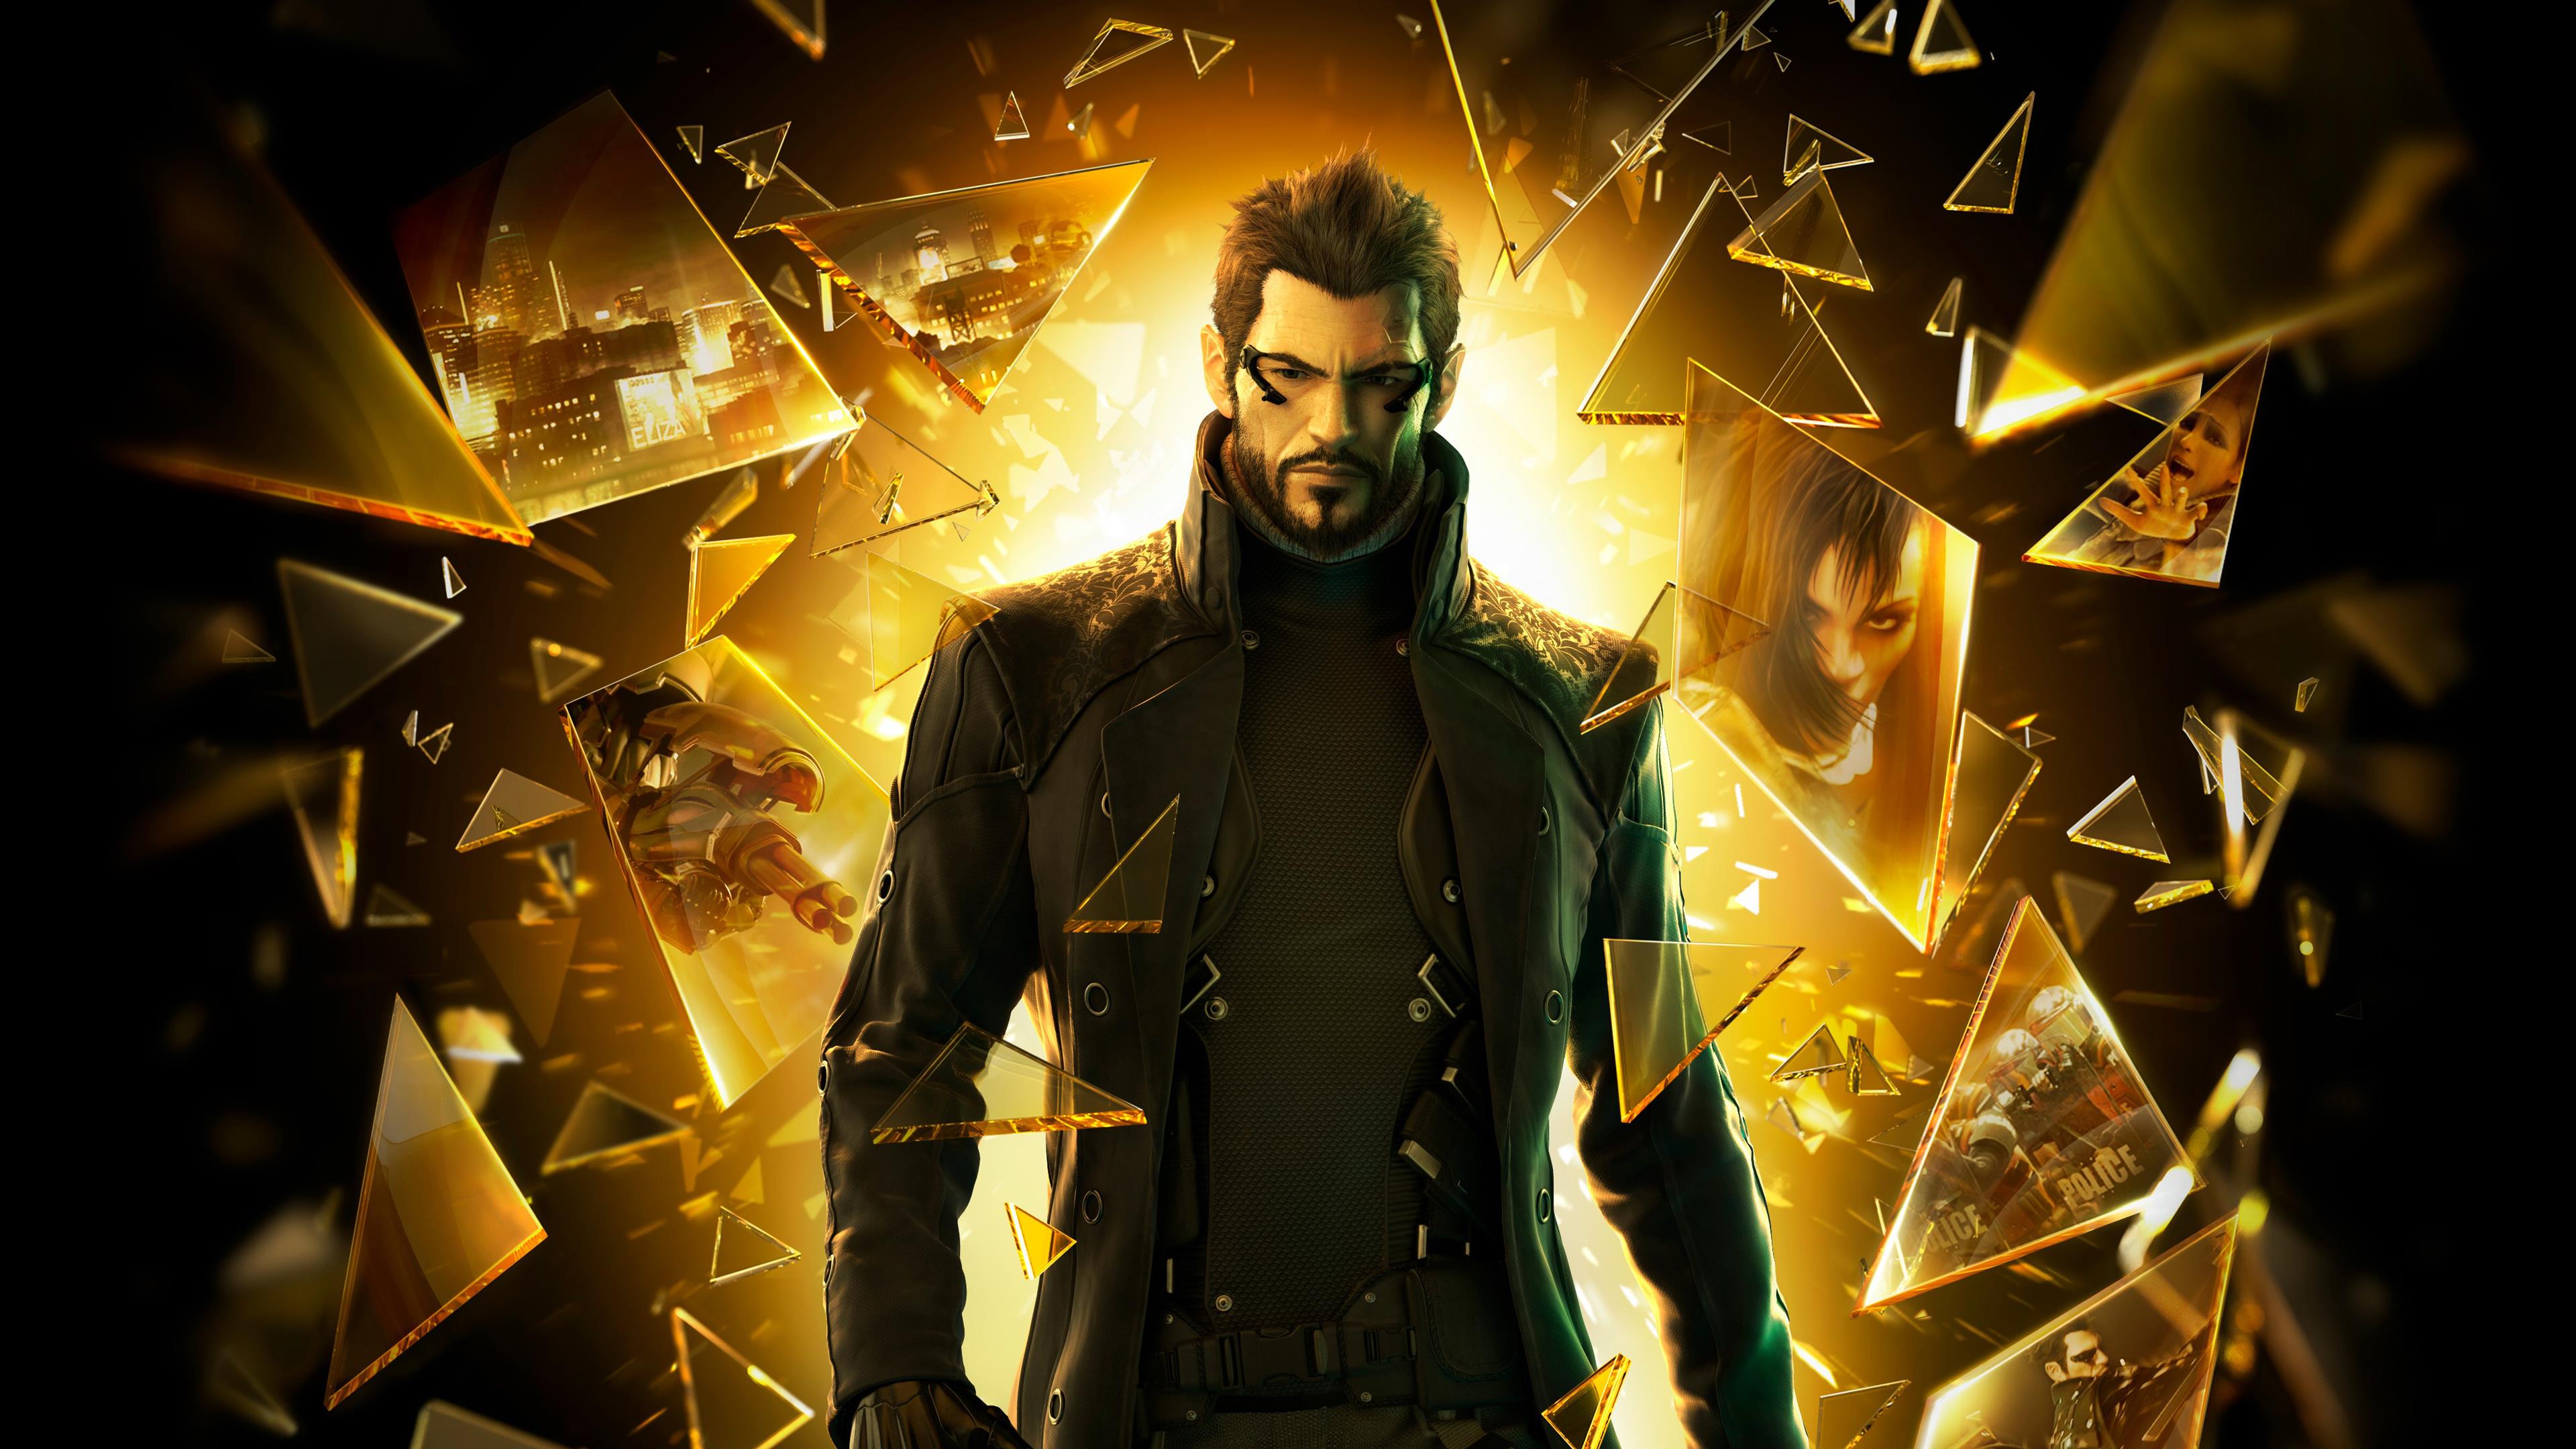  Deus Ex: Human Revolution's flawless gameplay has aged better than its goofy vision of a future obsessed with robot arms 